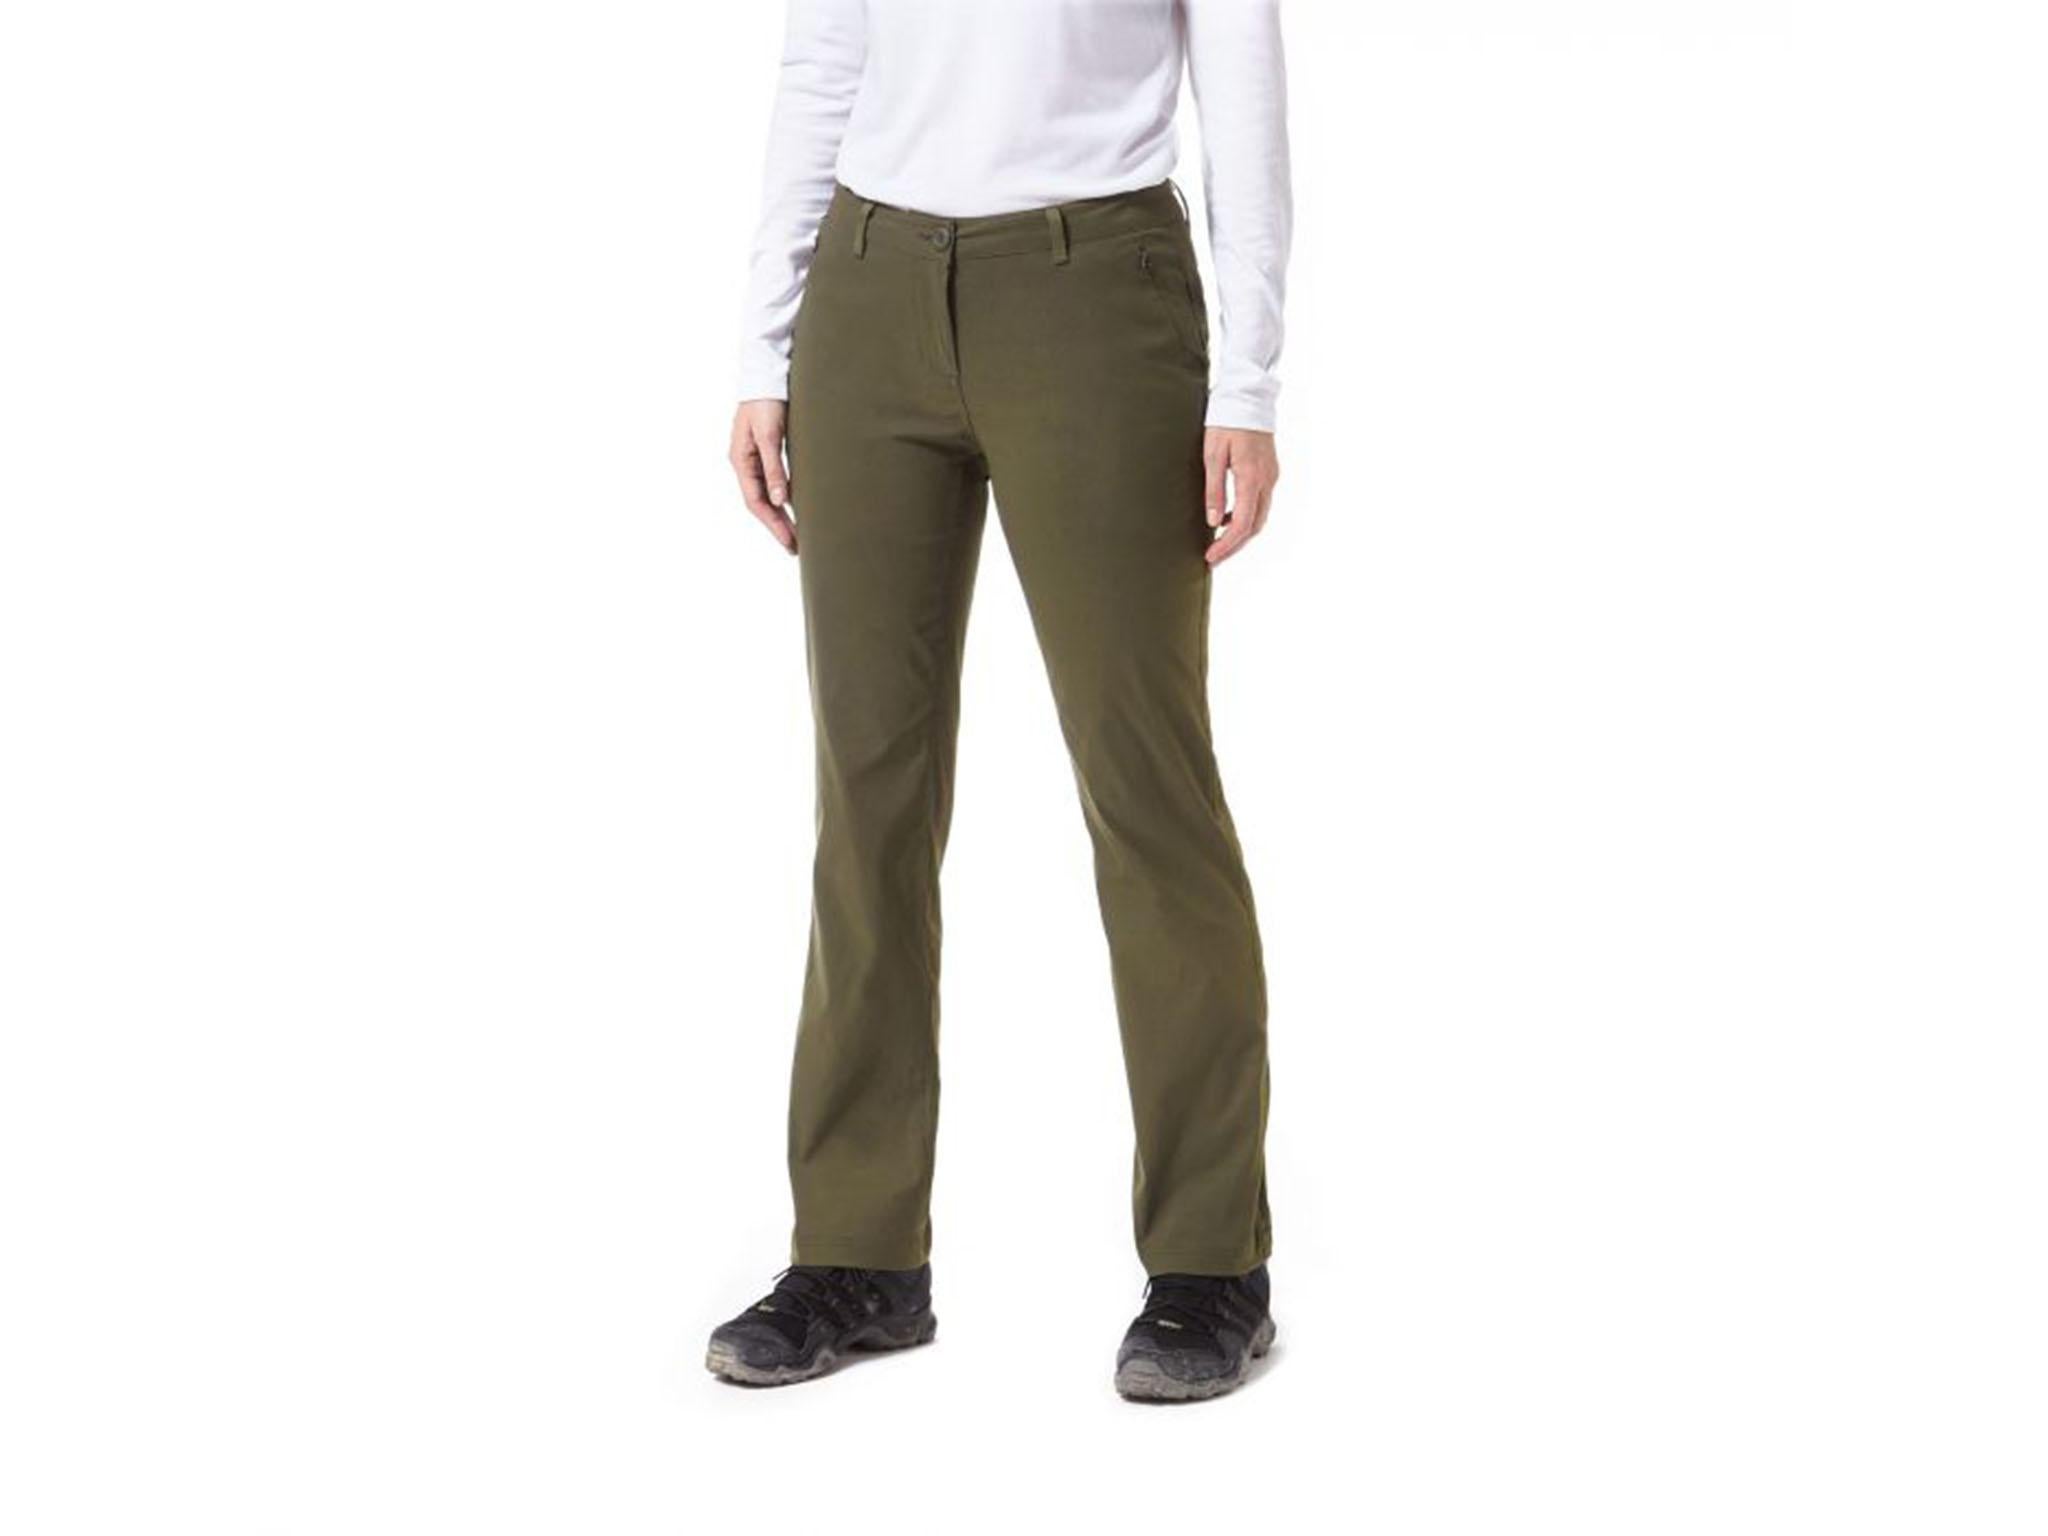 craghoppers walking trousers